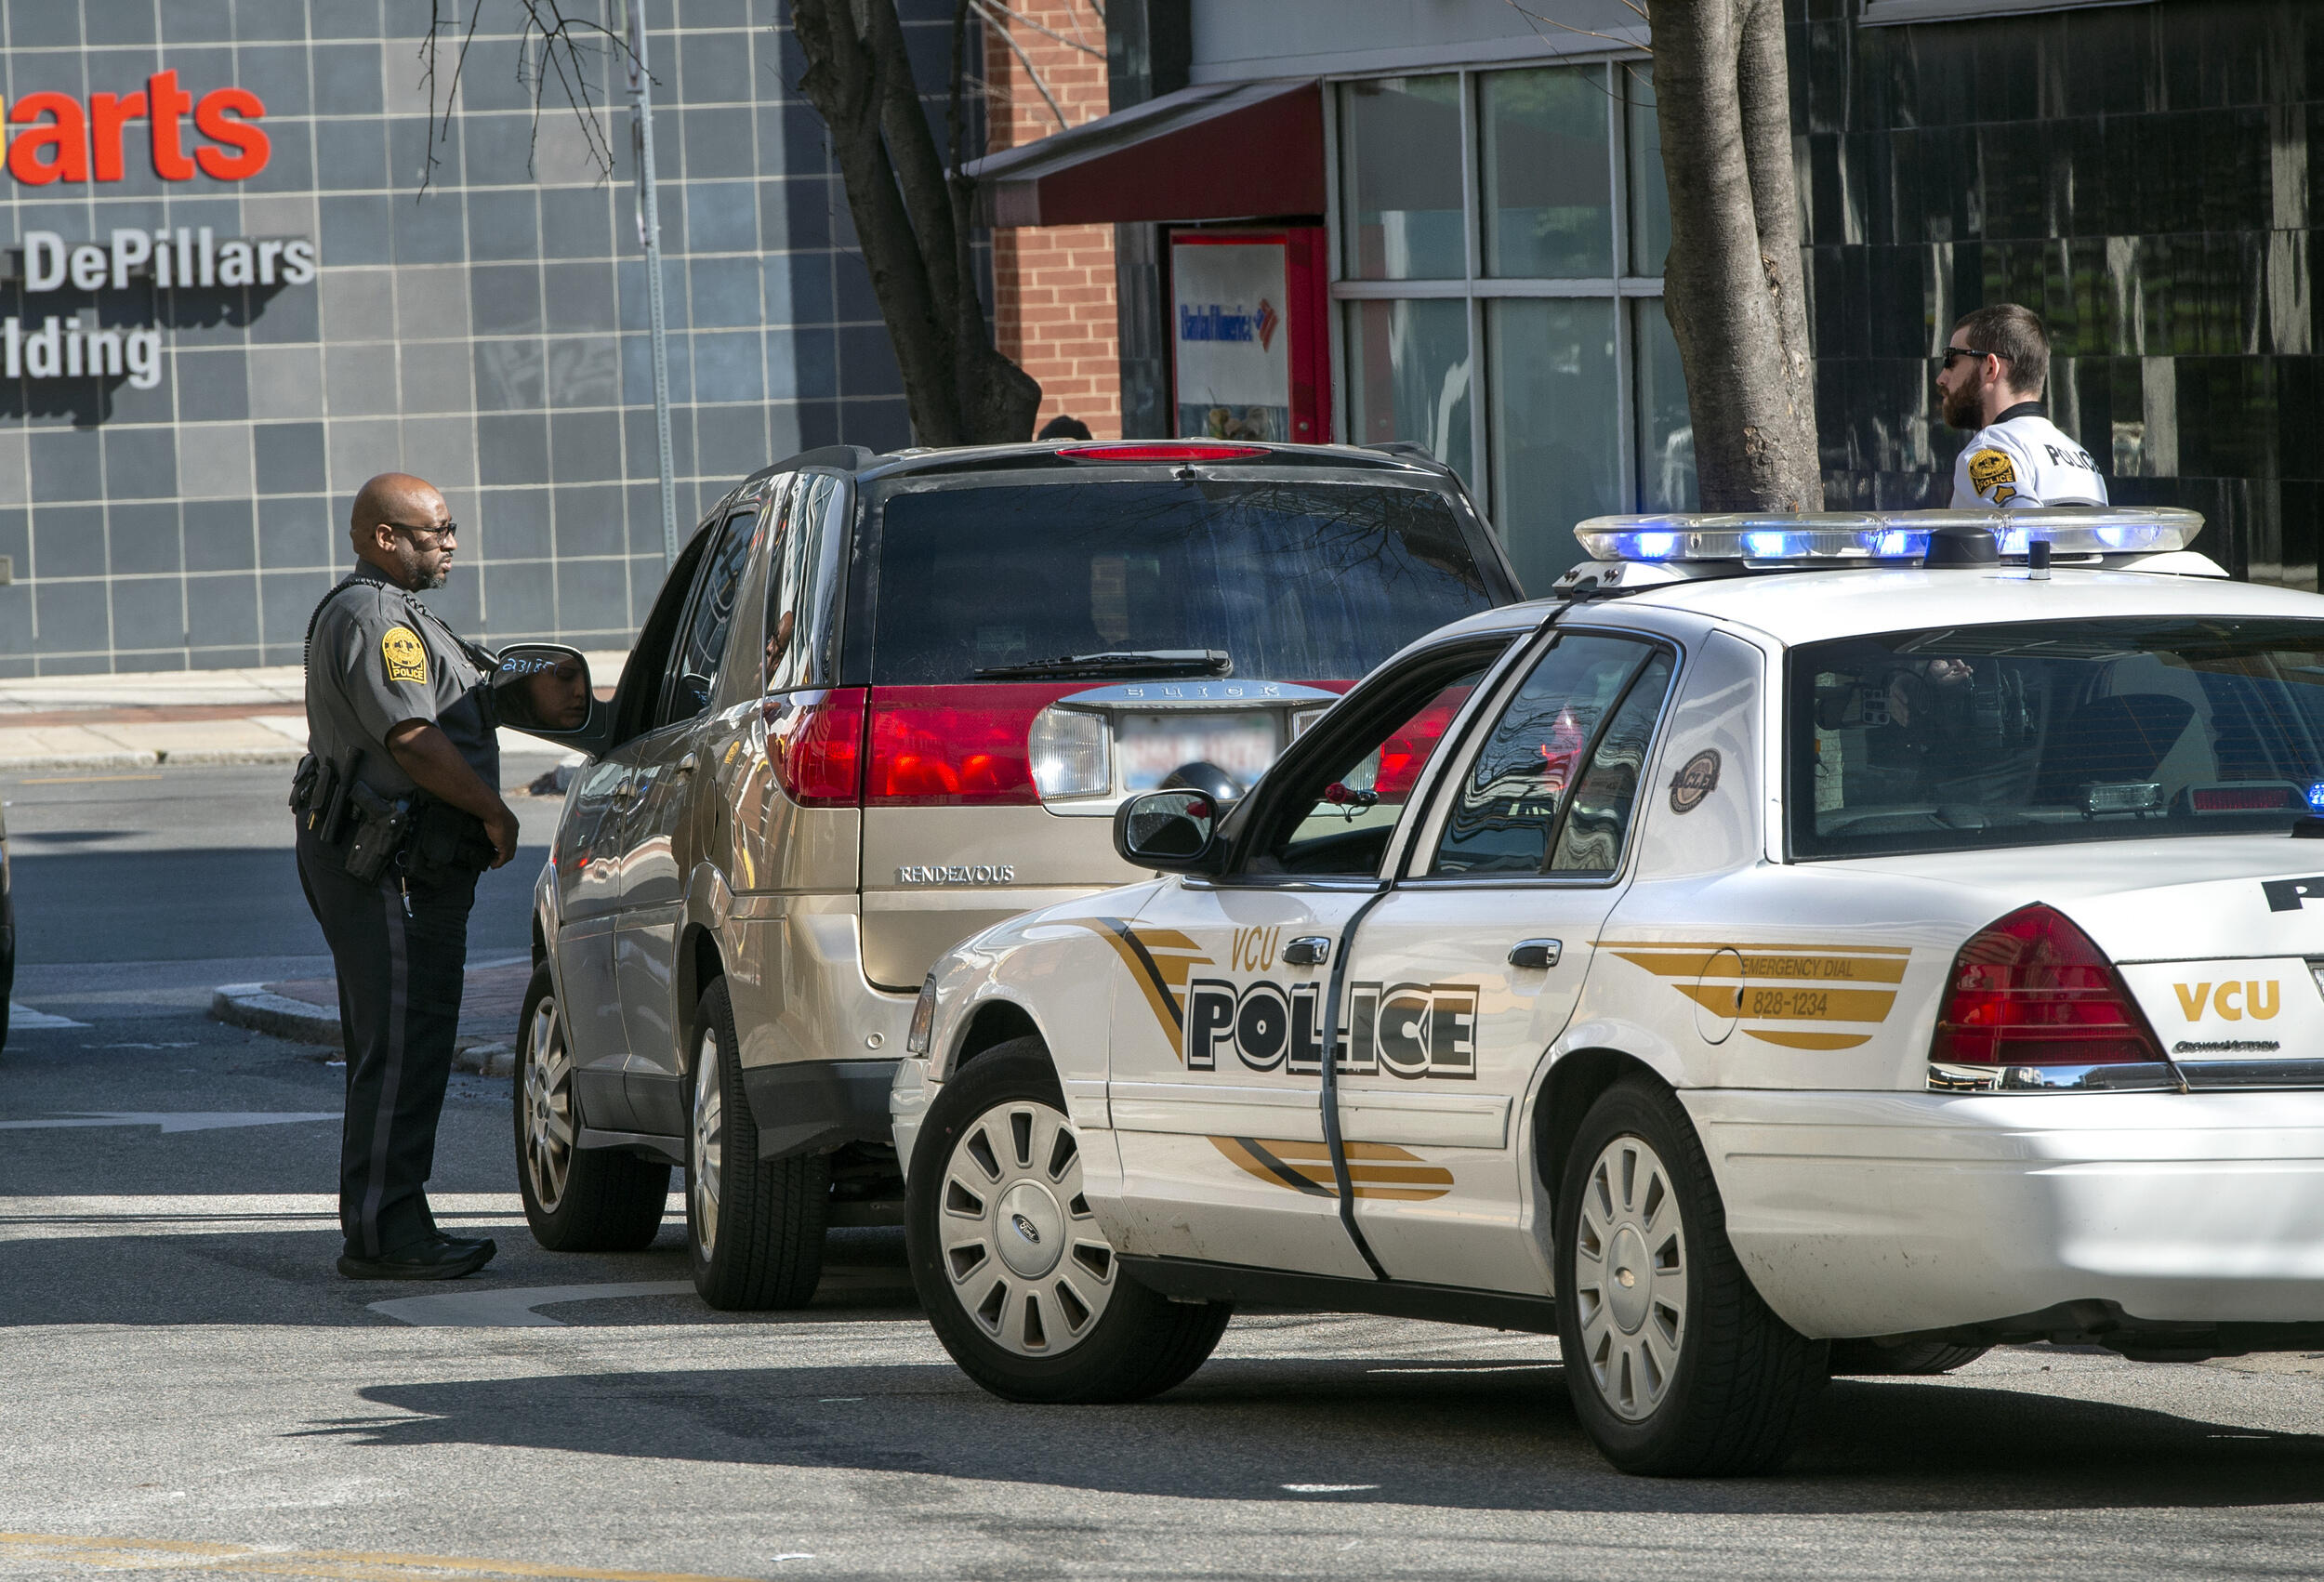 A police car parked behind an SUV. A police officer is standing next to the driver's window of the SUV.